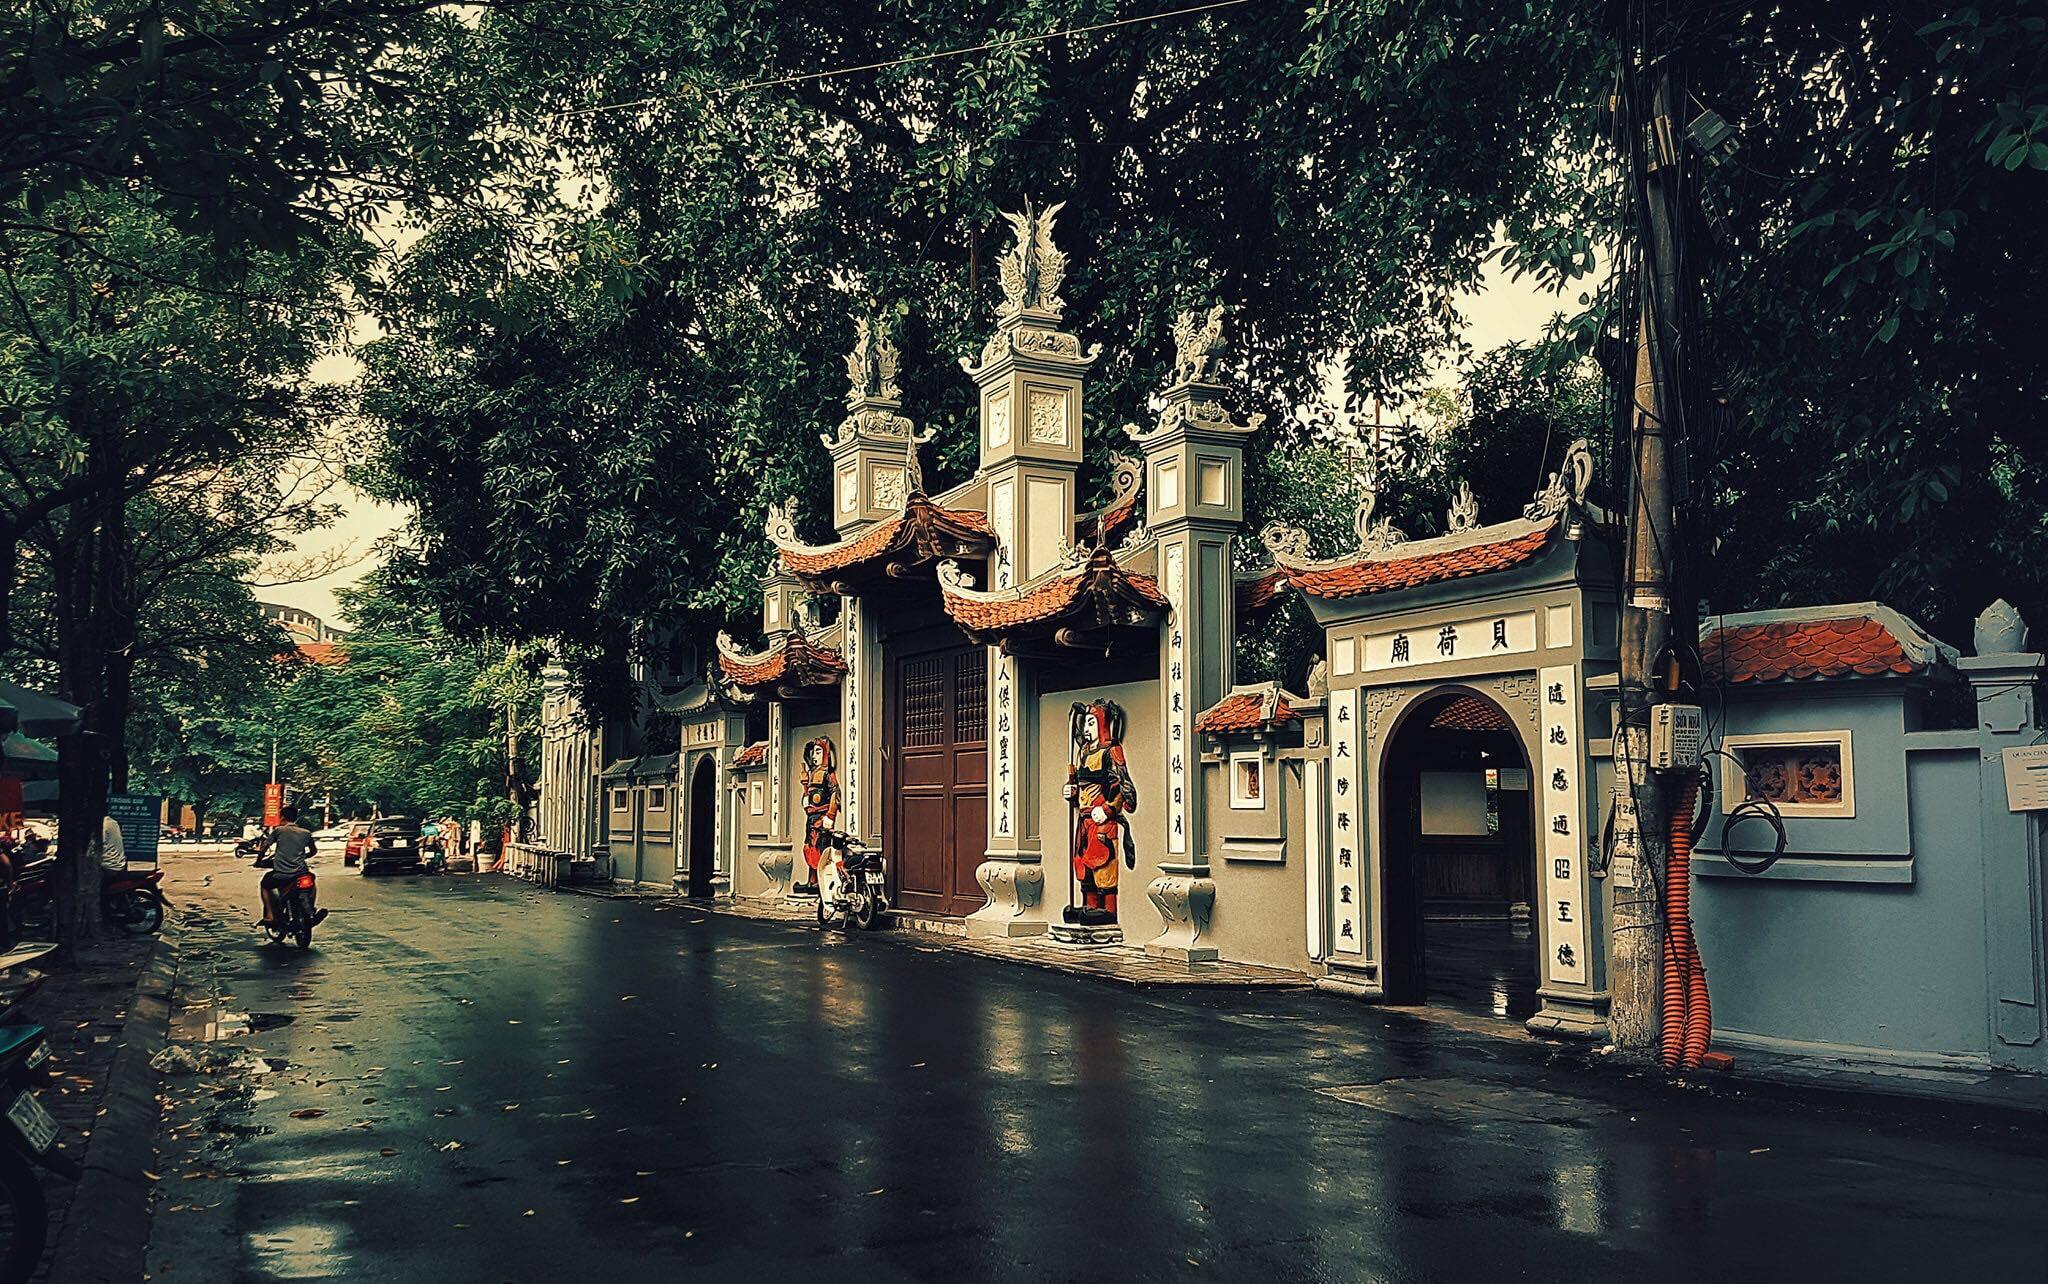 Ha Temple in Hanoi - The culture, sights, Buddhism, Traditions, Temple, Architecture, Vietnam, Travels, Southeast Asia, Longpost